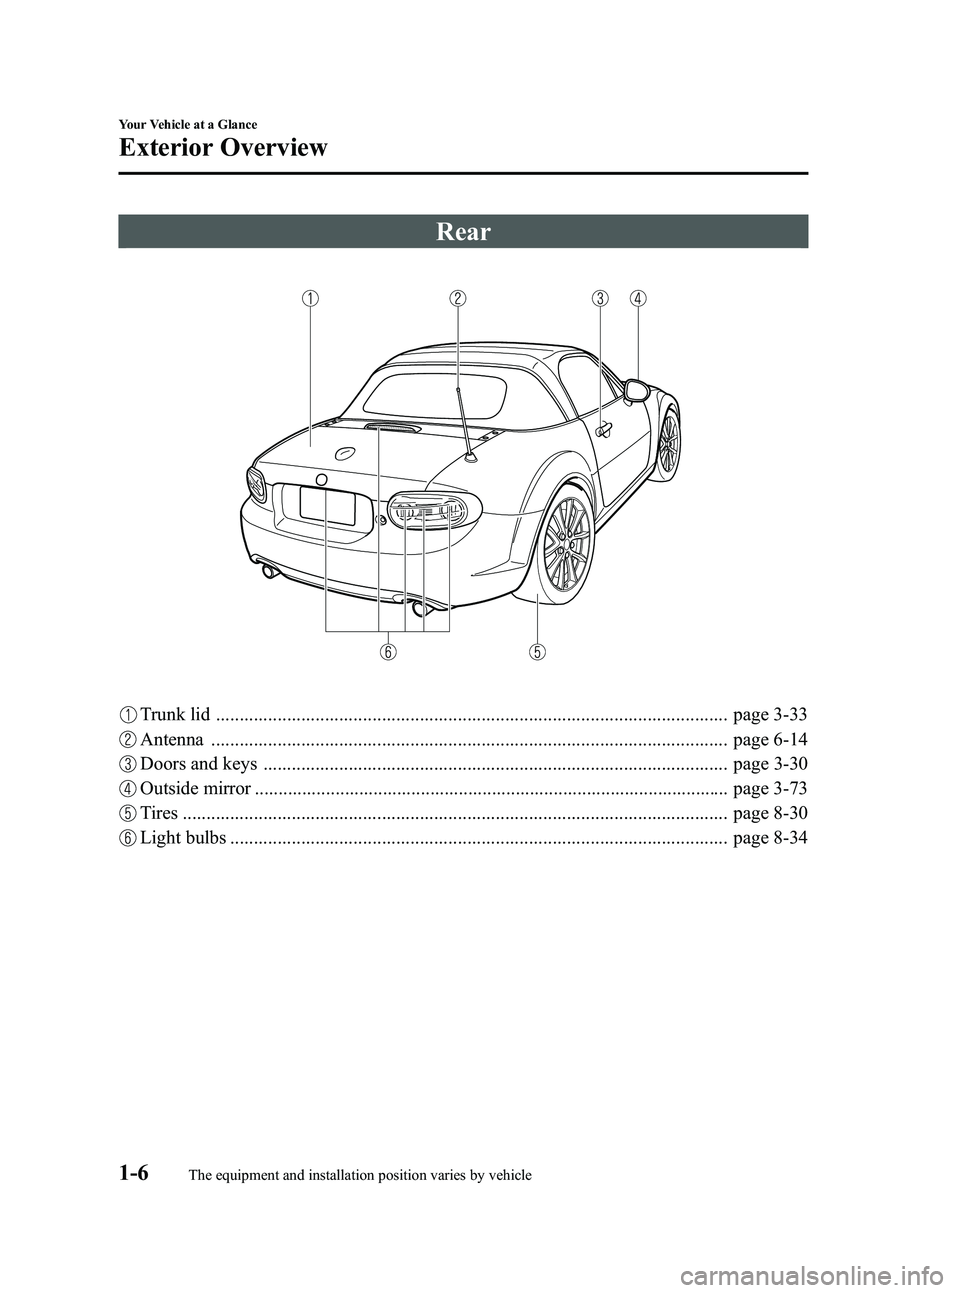 MAZDA MODEL MX-5 MIATA POWER RETRACTABLE HARDTOP 2010  Owners Manual Black plate (12,1)
Rear
Trunk lid ............................................................................................................ page 3-33
Antenna .......................................